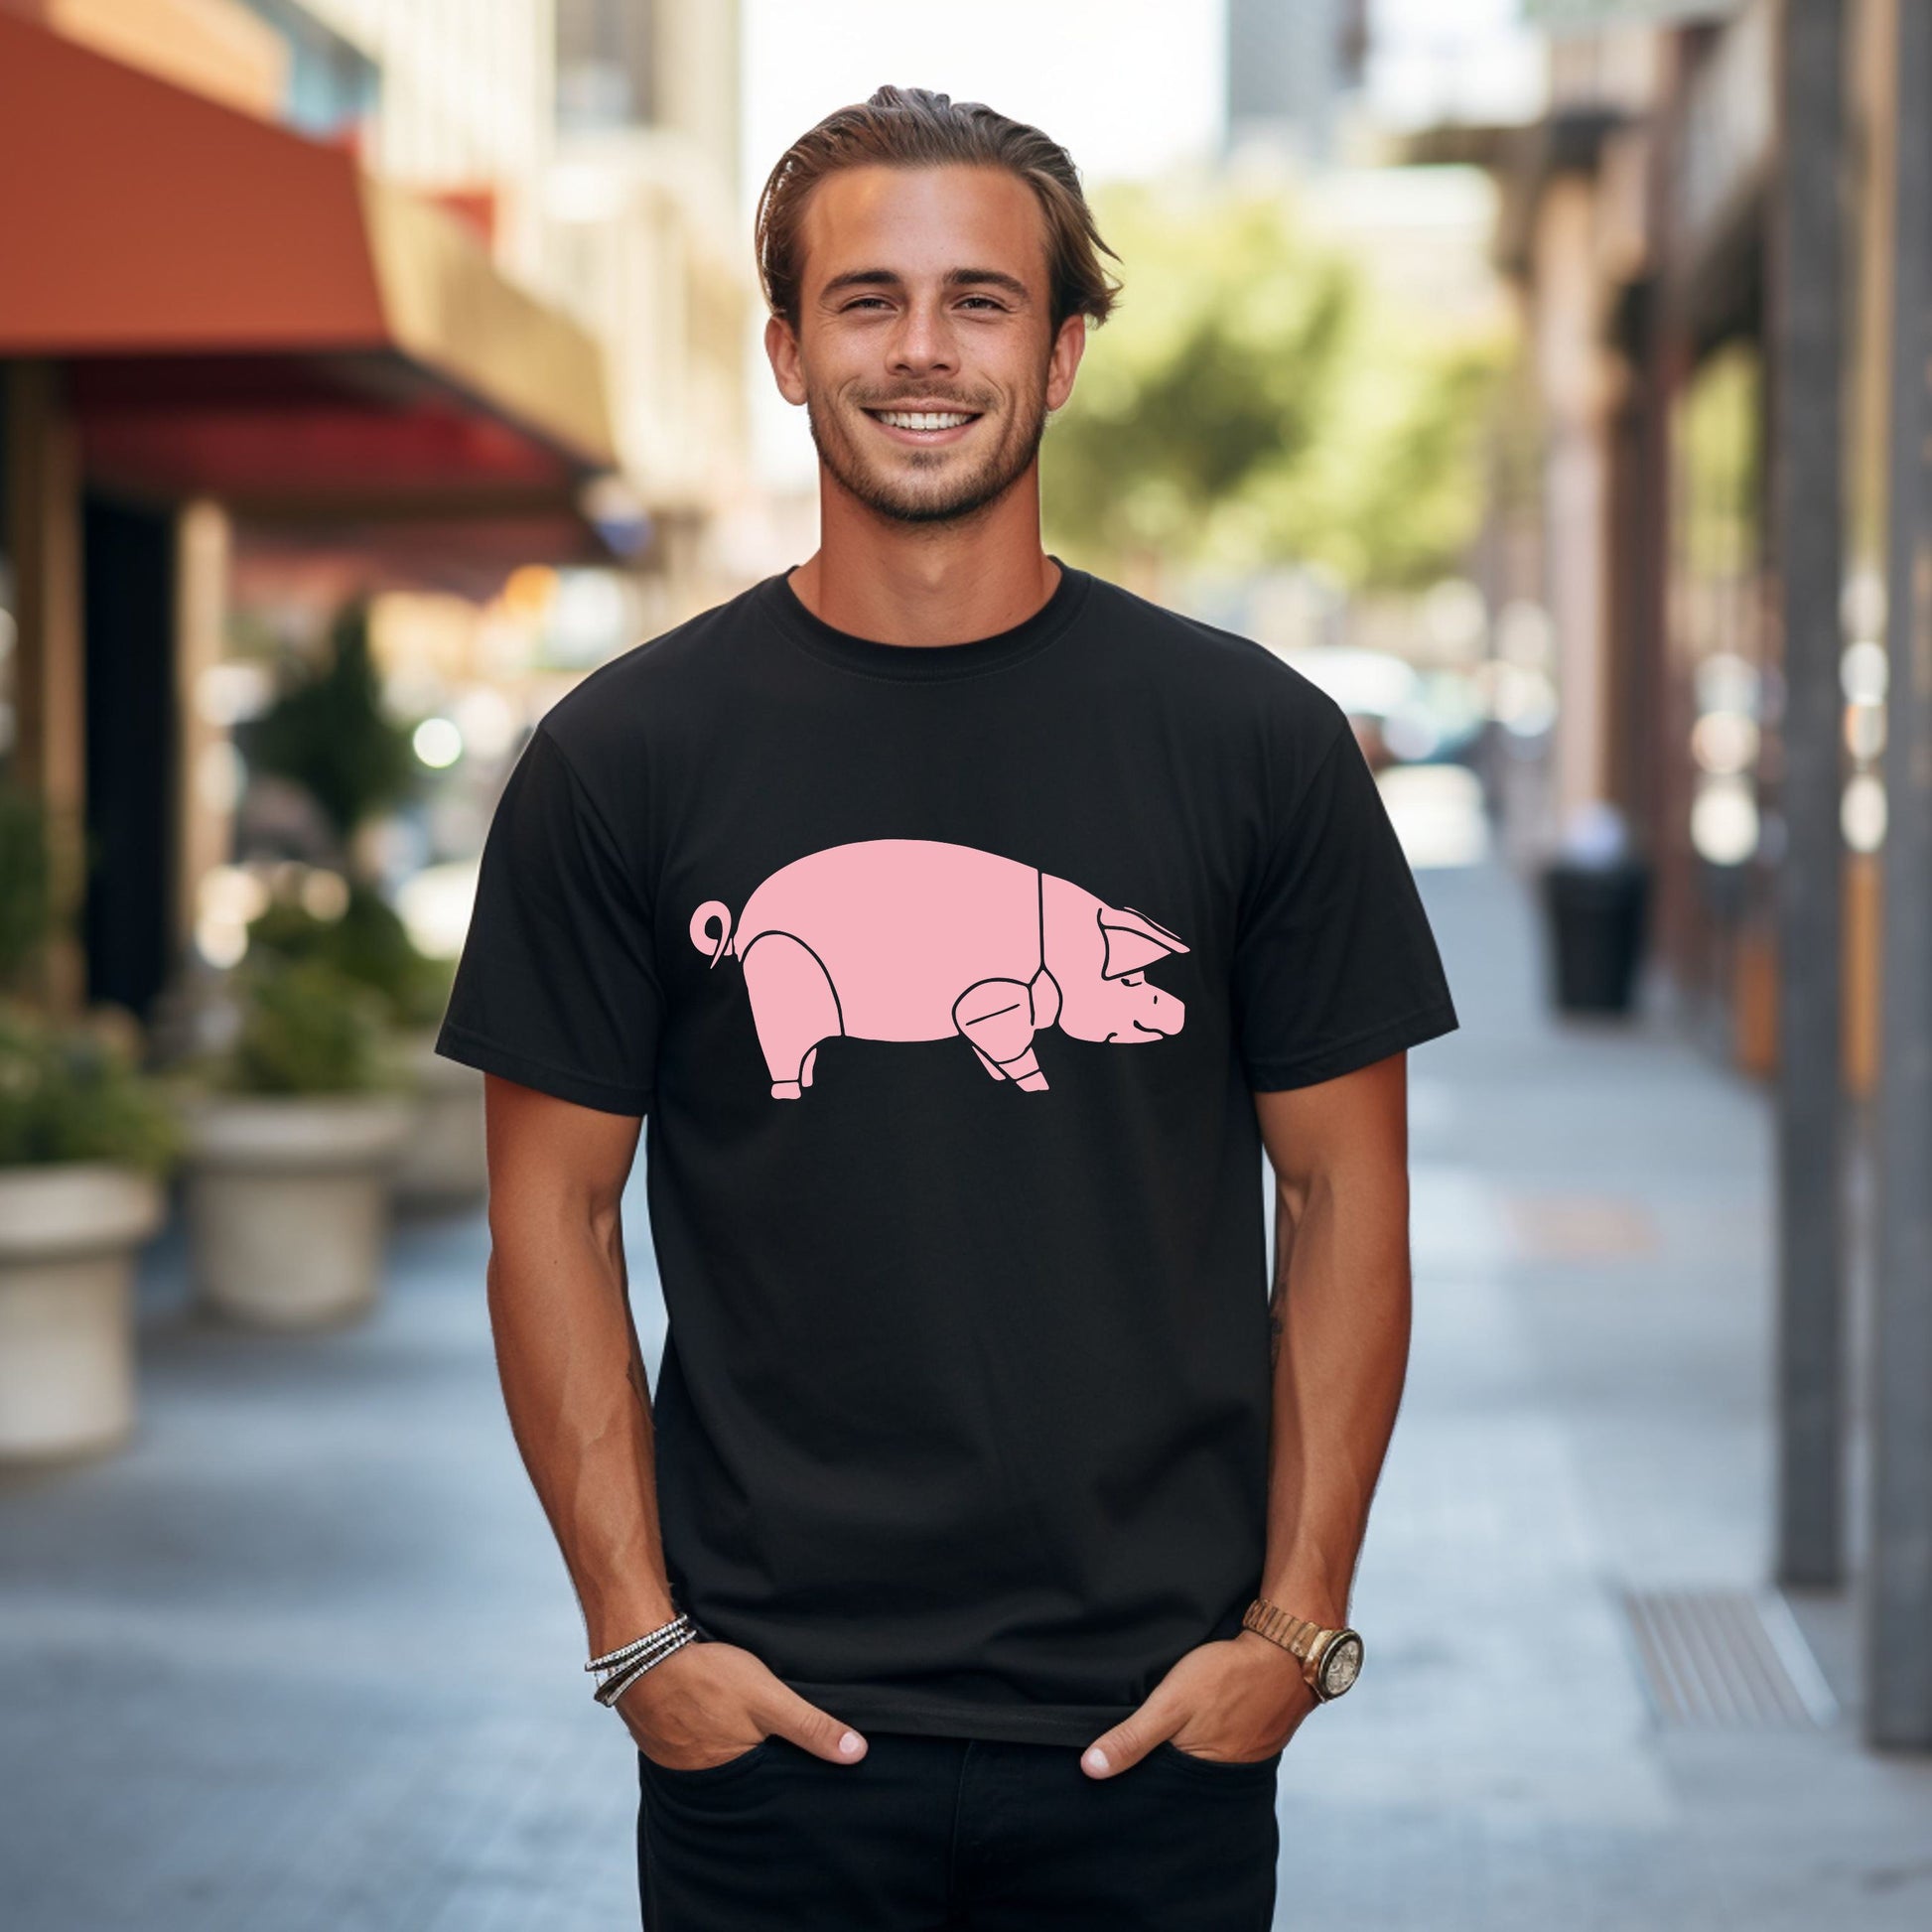 Graphic pink pig on a black T-shirt.